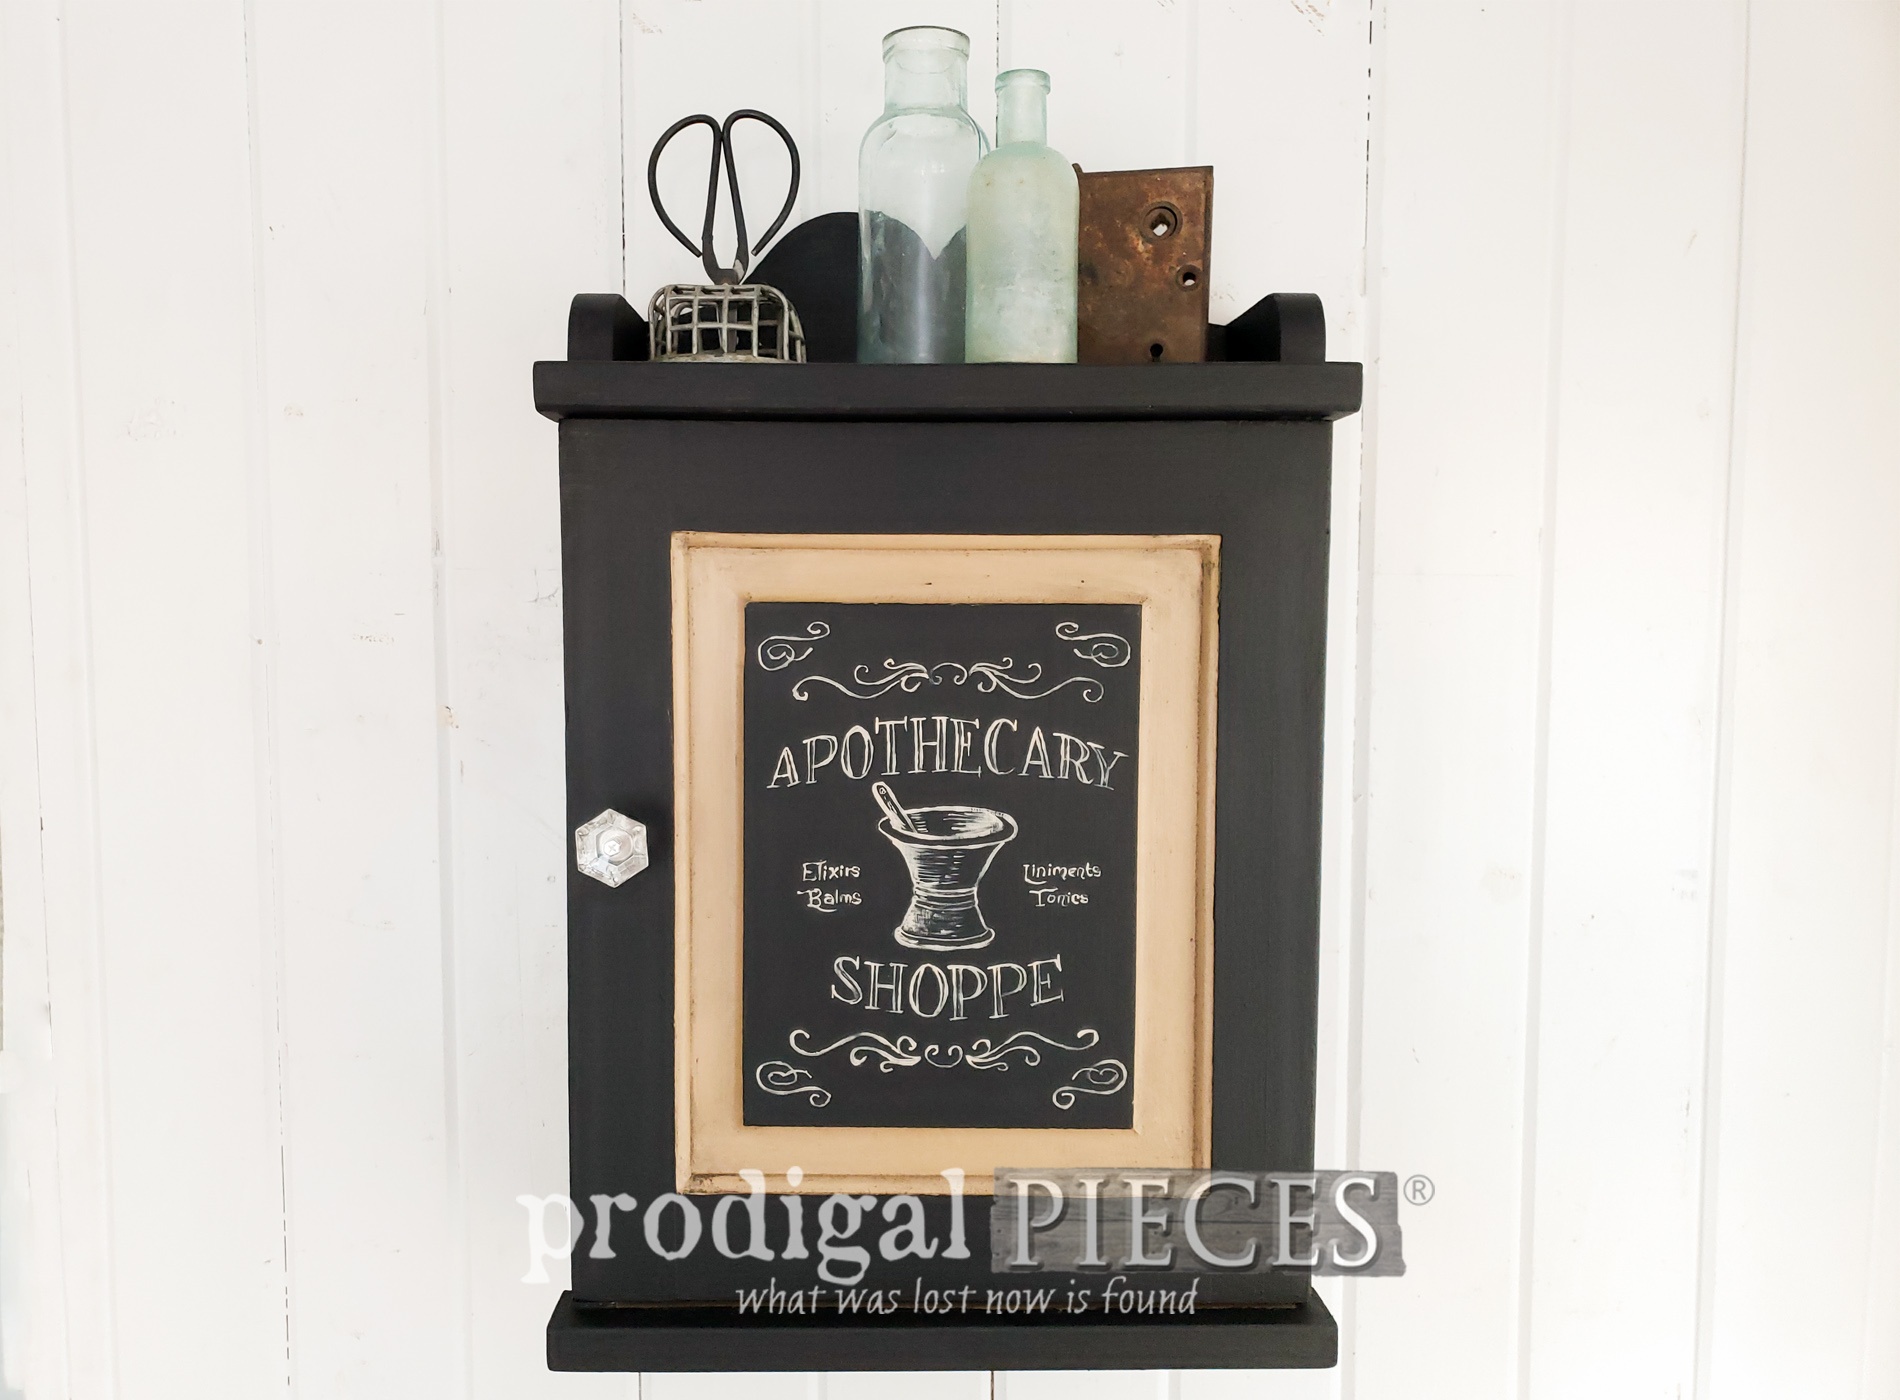 Featured Vintage Apothecary Cabinet Makeover by Larissa of Prodigal Pieces | DIY tutorial at prodigalpieces.com #prodigalpieces #farmhouse #home #homedecor #diy #apothecary